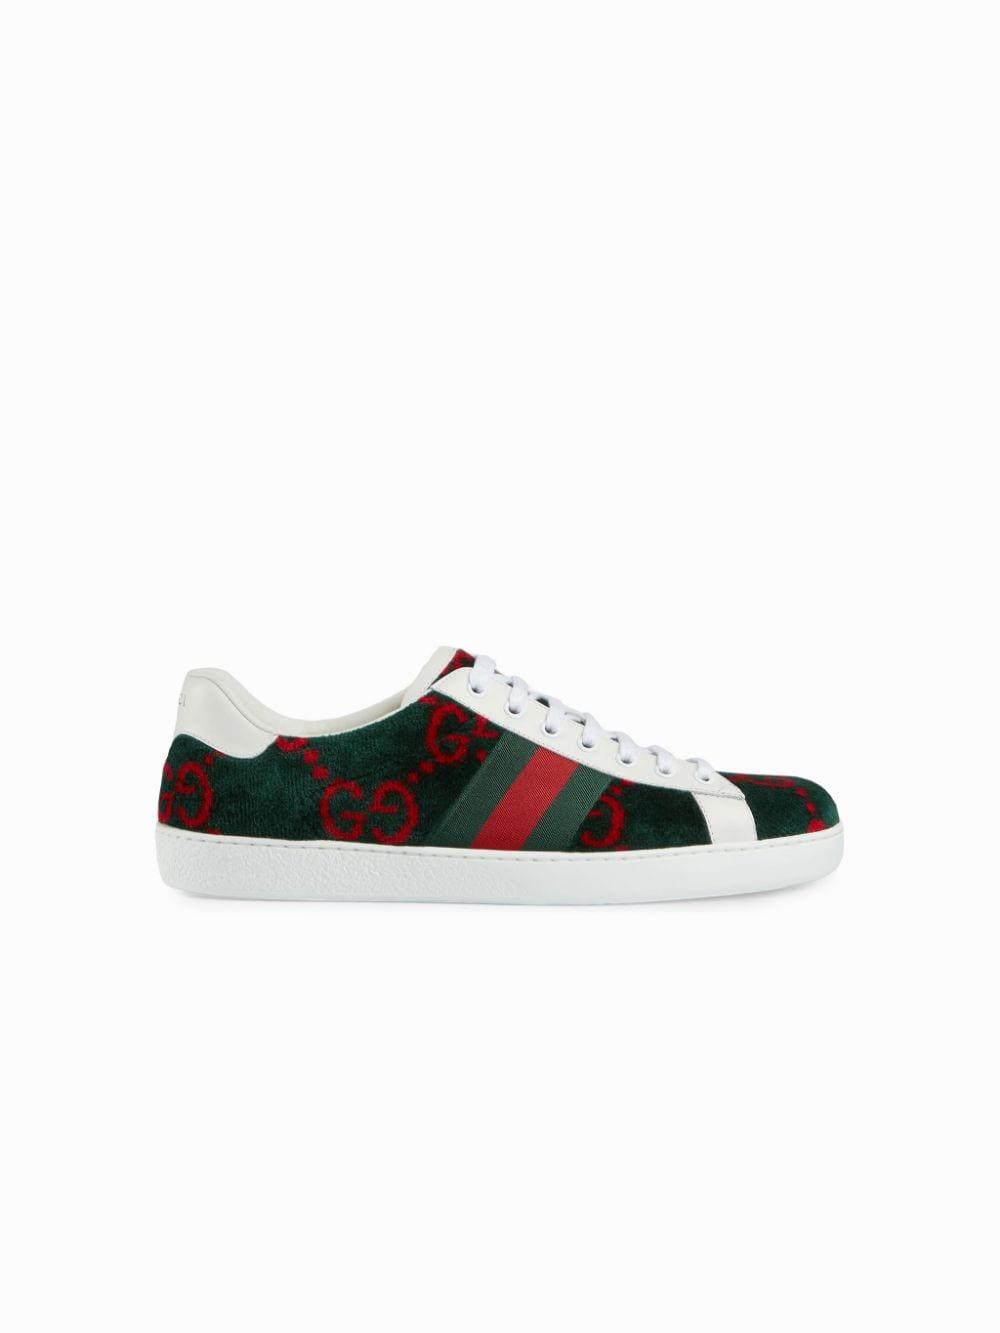 gucci sneakers red and green